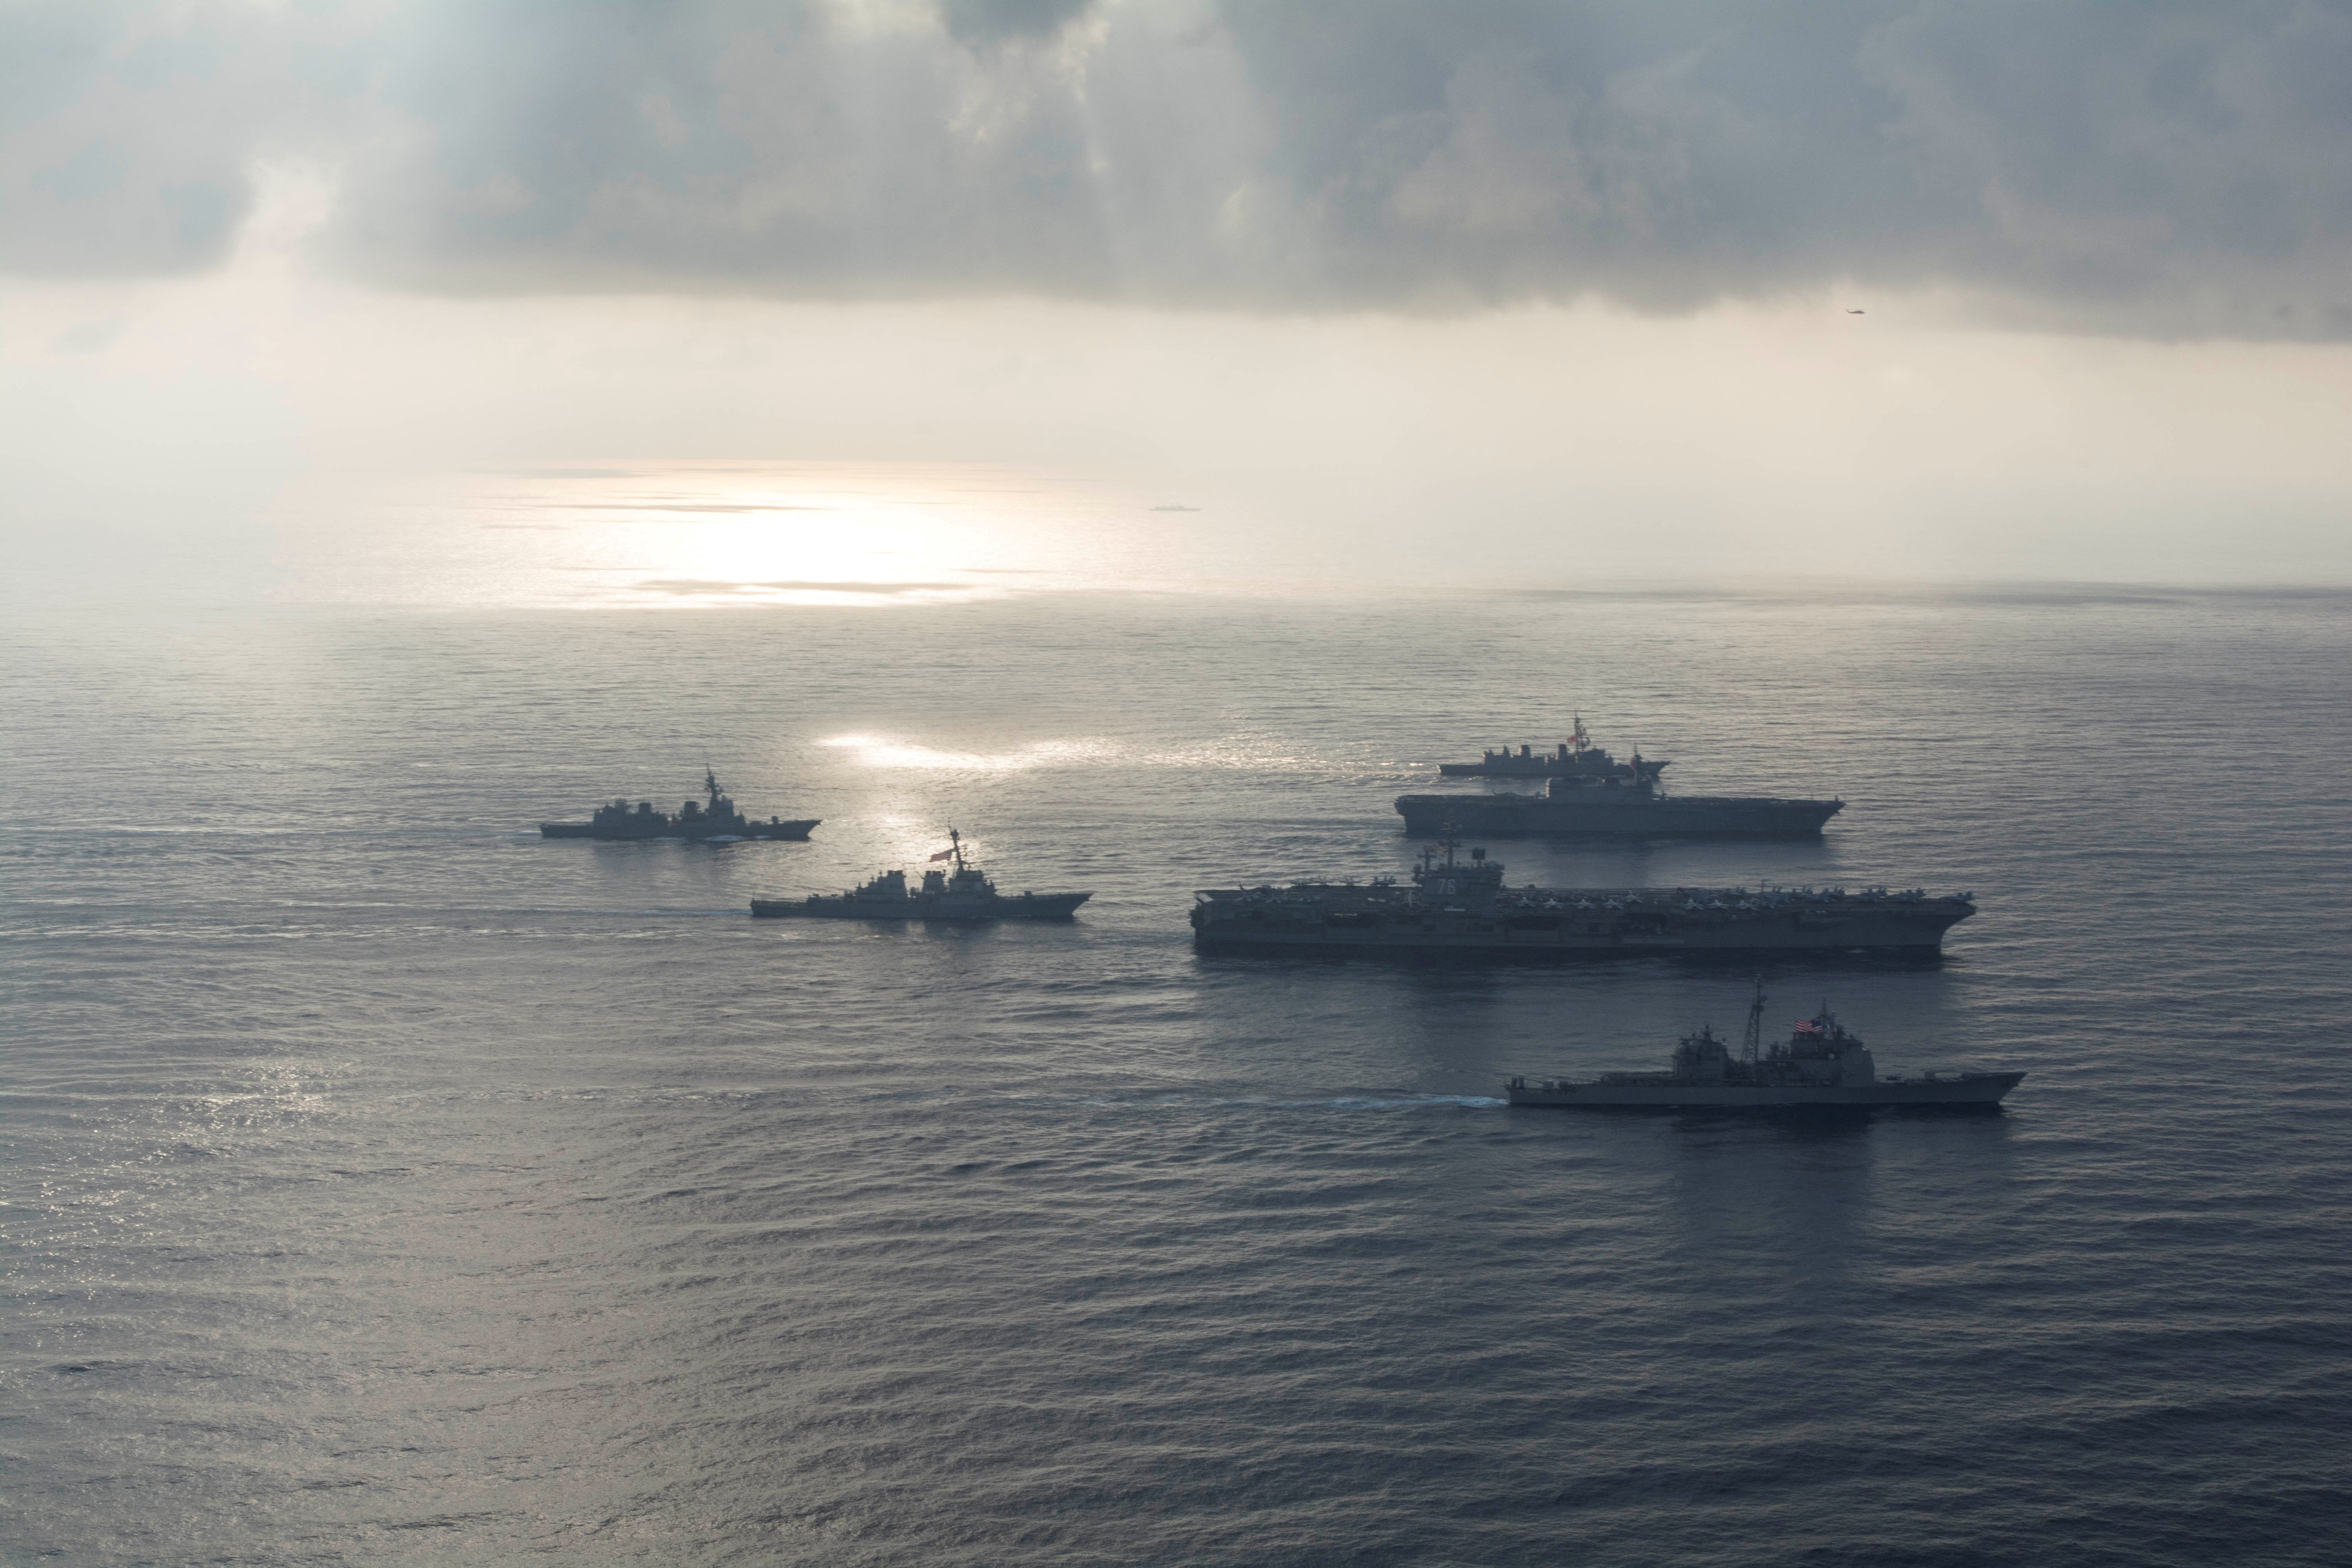 The Ronald Reagan Strike Group ship's aircraft carrier USS Ronald Reagan conduct an exercise with the Japanese Maritime Self-Defense Force ships